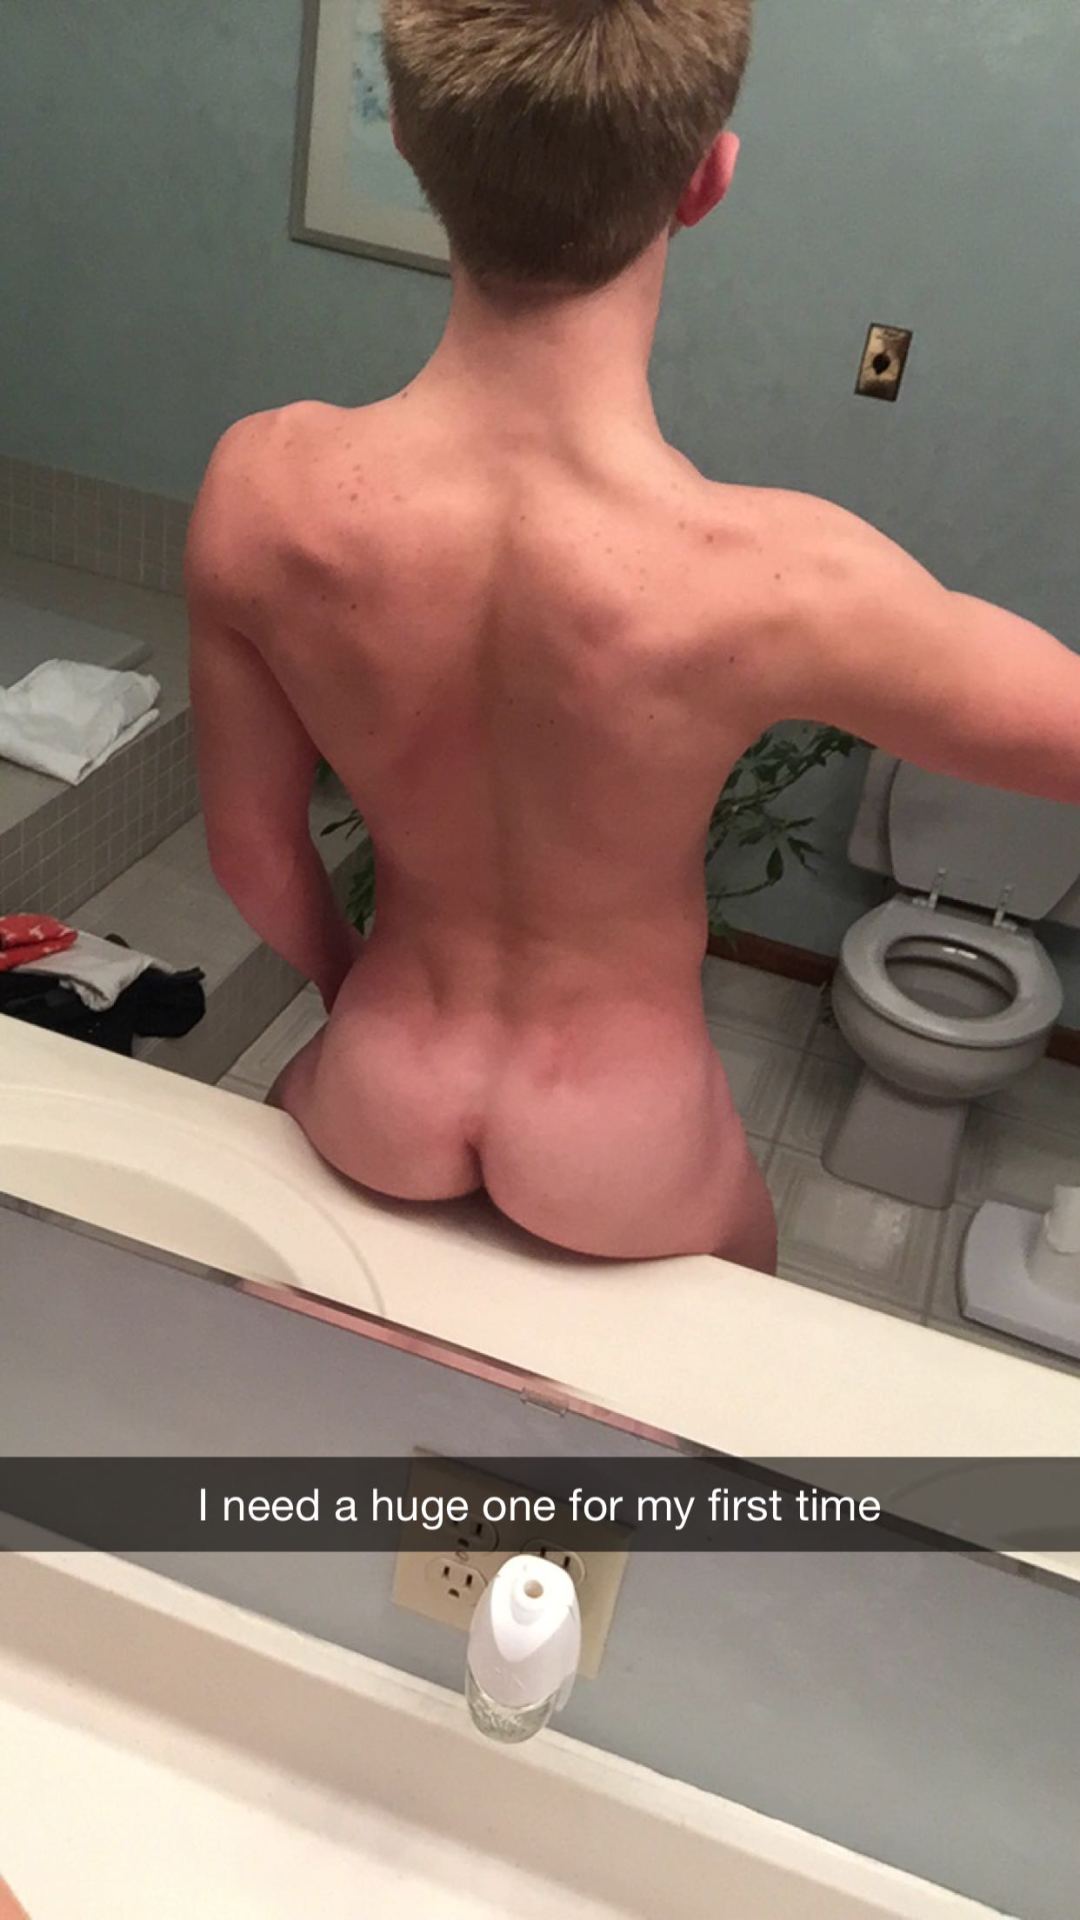 hornydickinsocks:  I seriously want to add him!!!!! Does anybody have hus snapchat